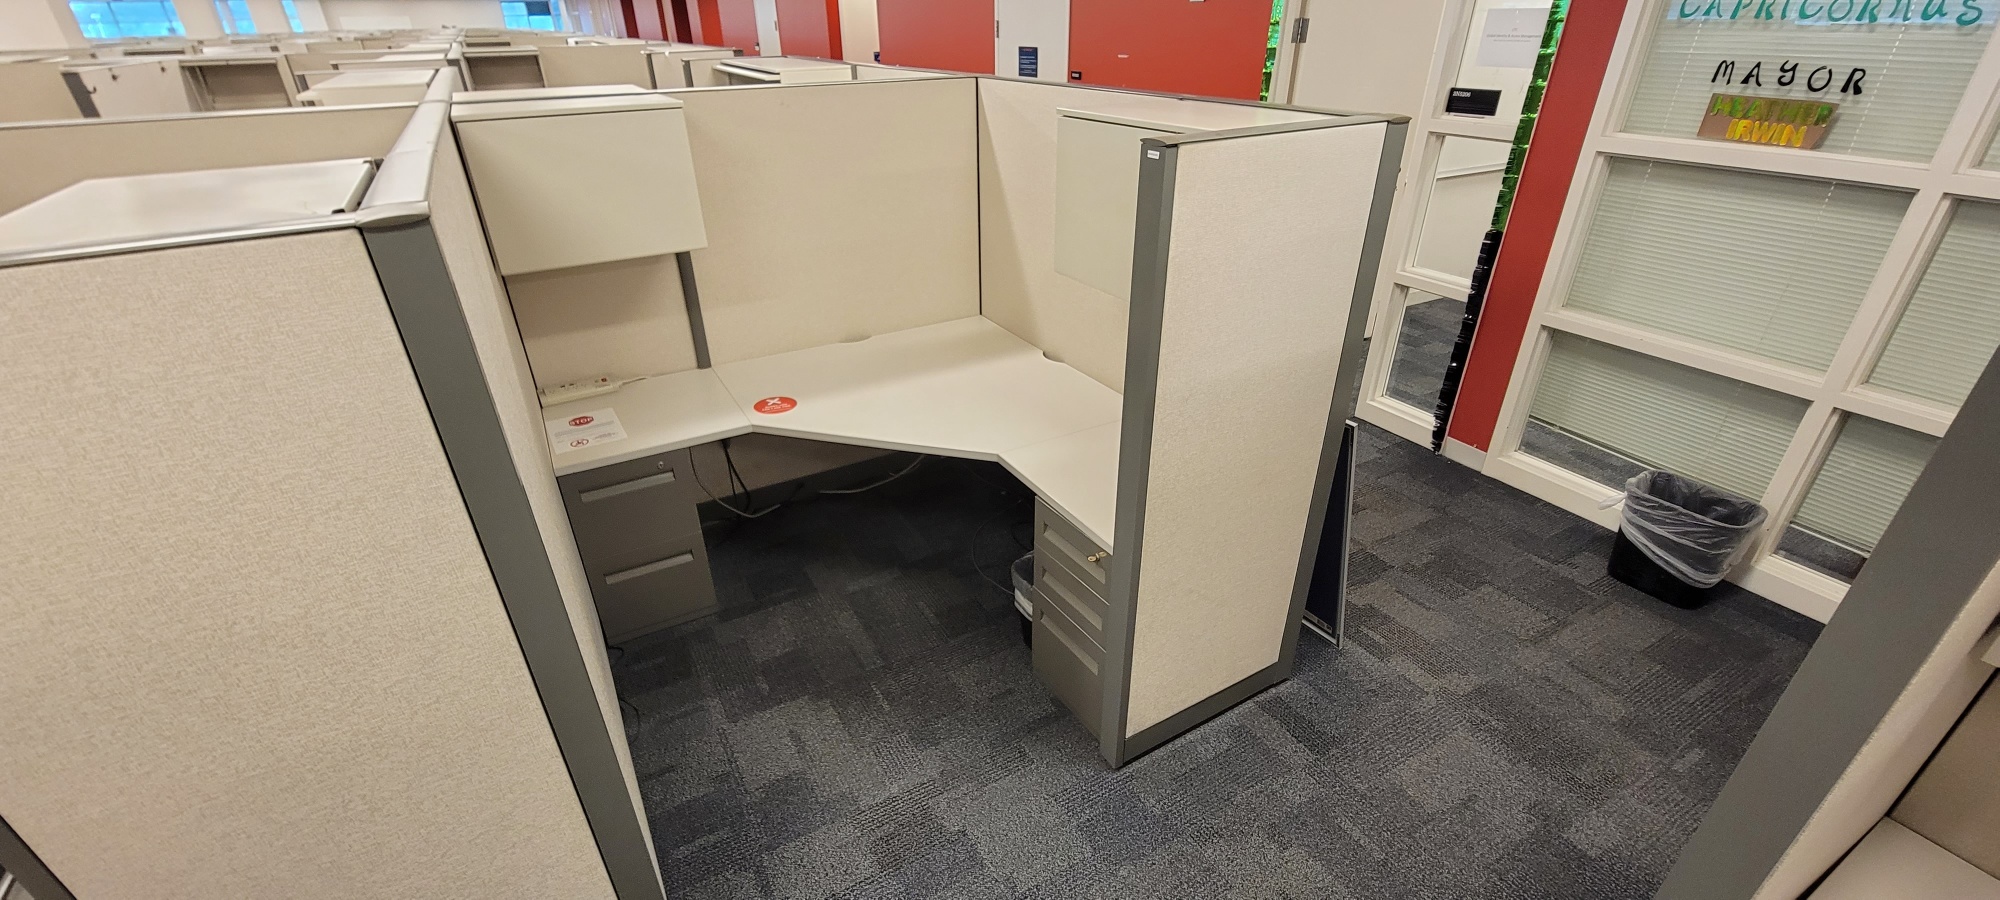 W6176 - Steelcase Answer Used Cubes